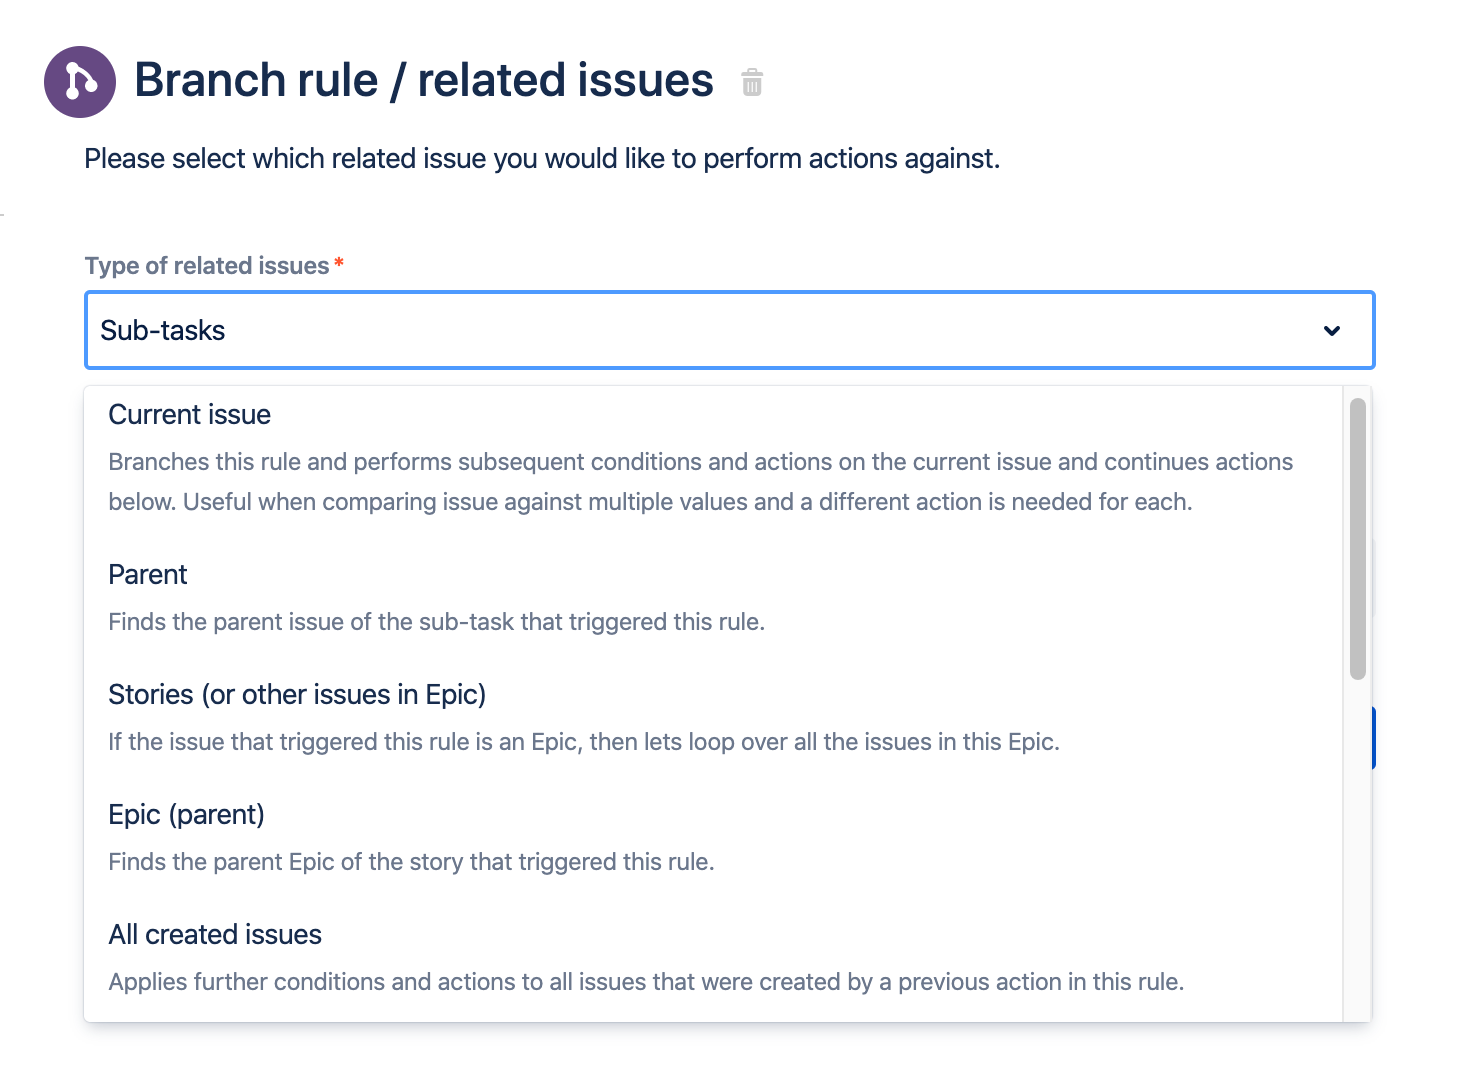 Branch rule configuration in Jira. The dropdown is open, showing all branching options such as Parent and All created issues.